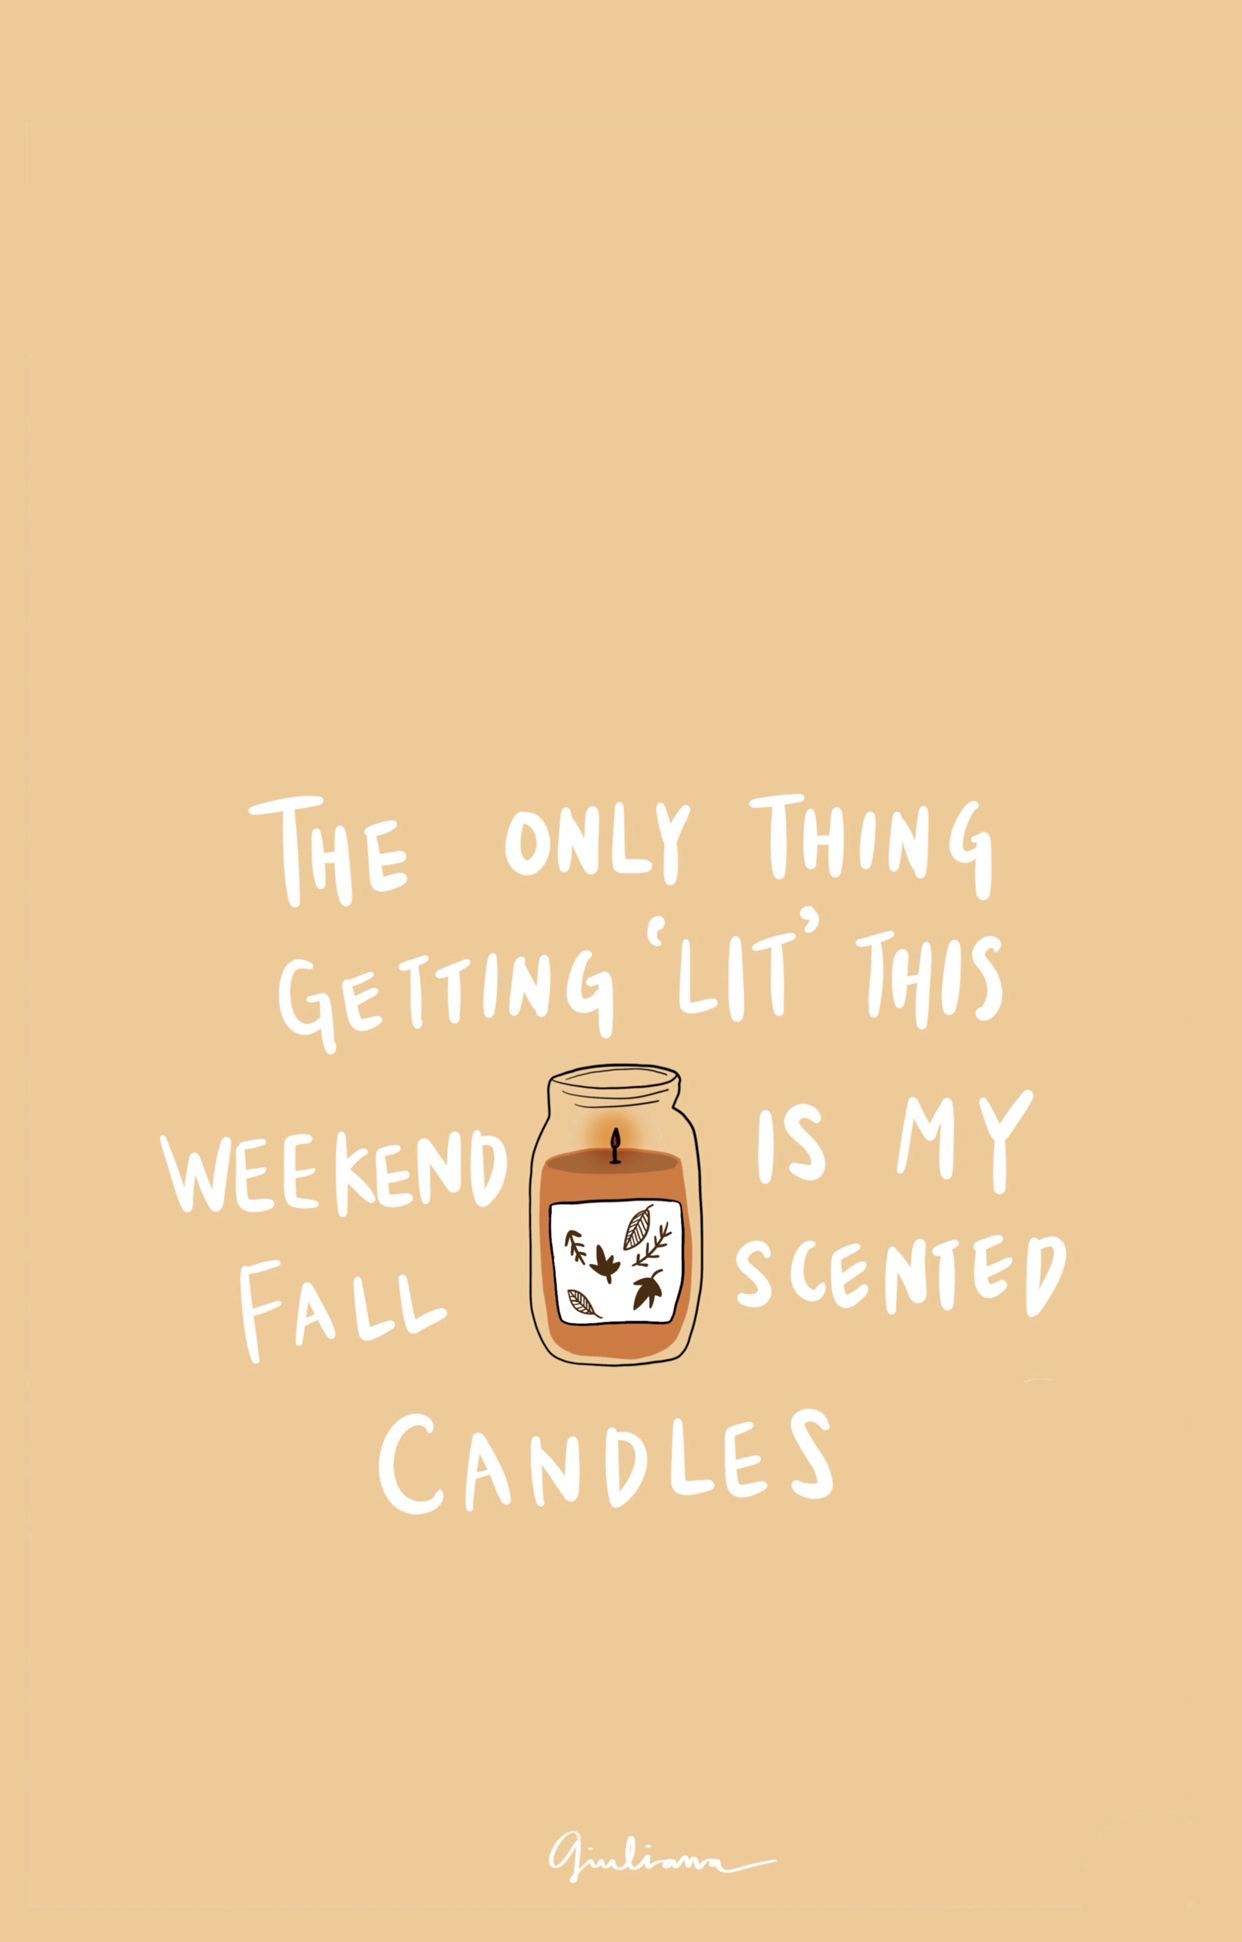 The only thing getting me through this weekend is fall candles - October